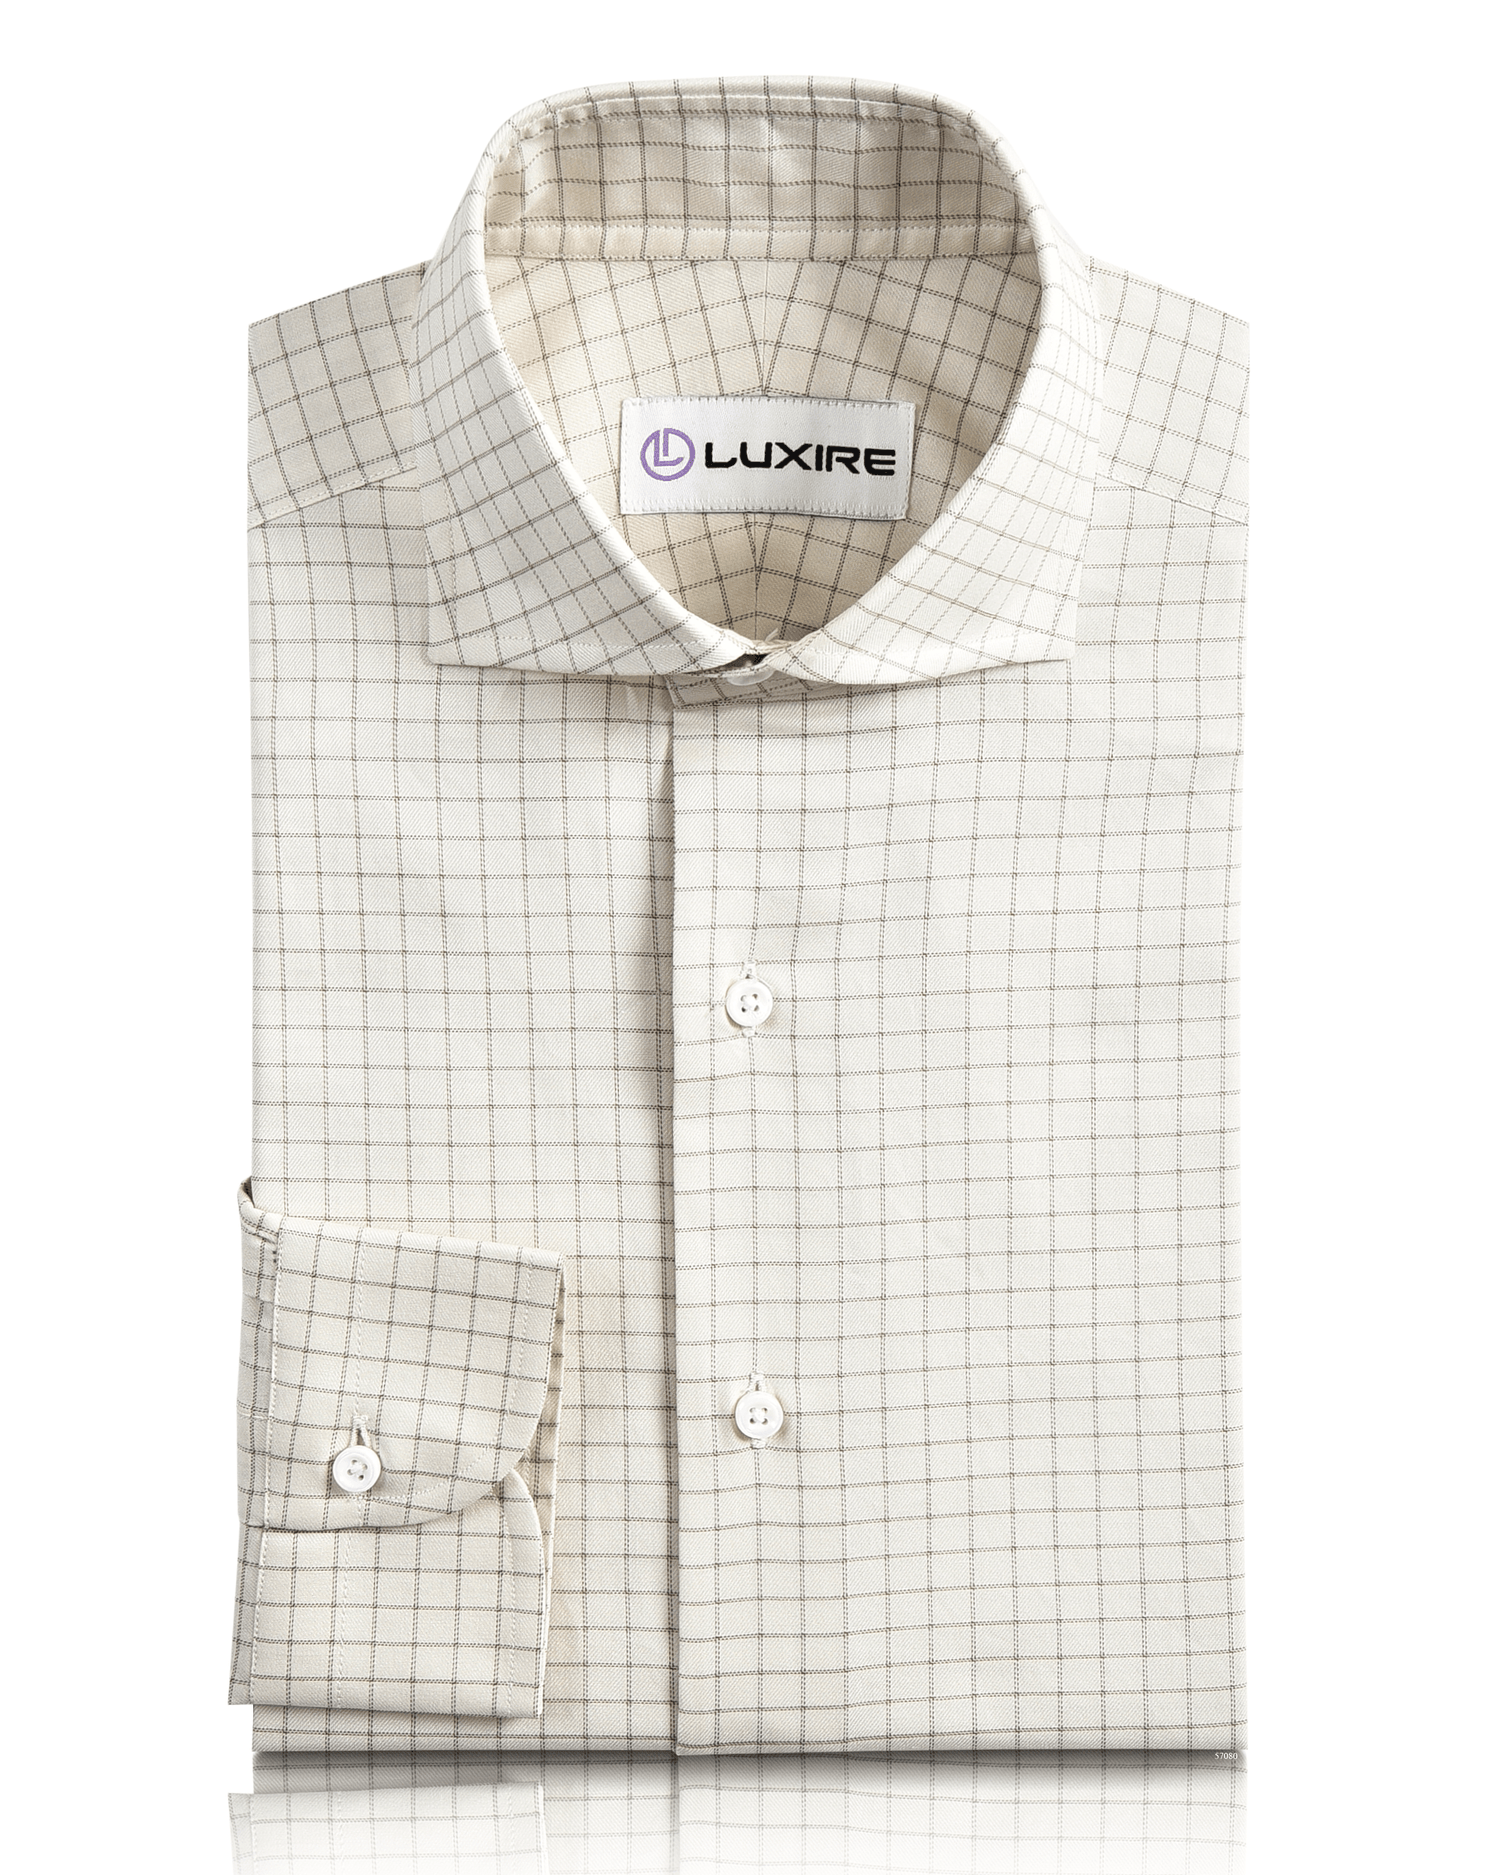 Front view of custom check shirts for men by Luxire cream tan